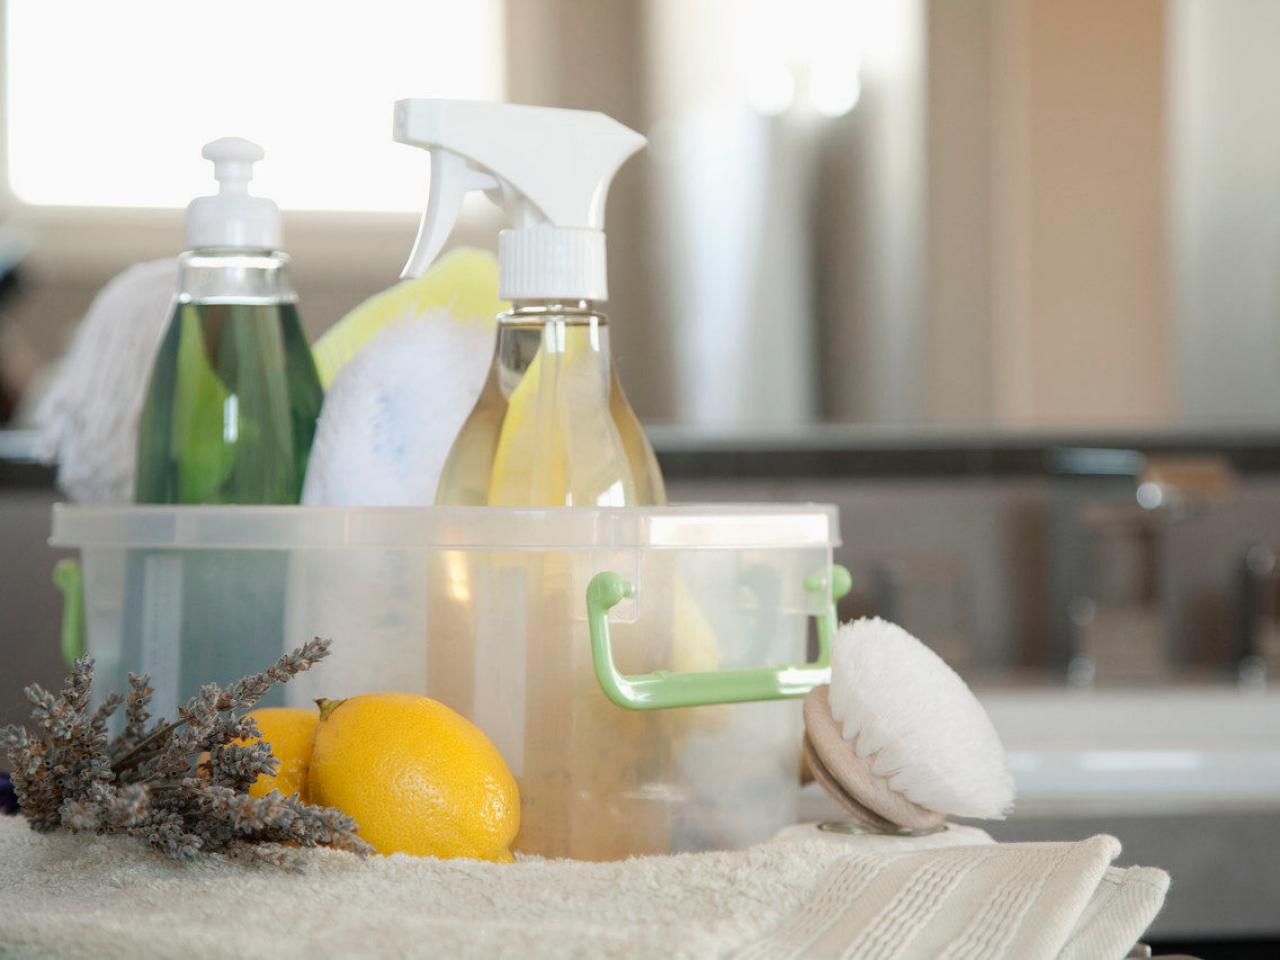 What are natural cleaning agents you can make to clean ceramic tile floors?